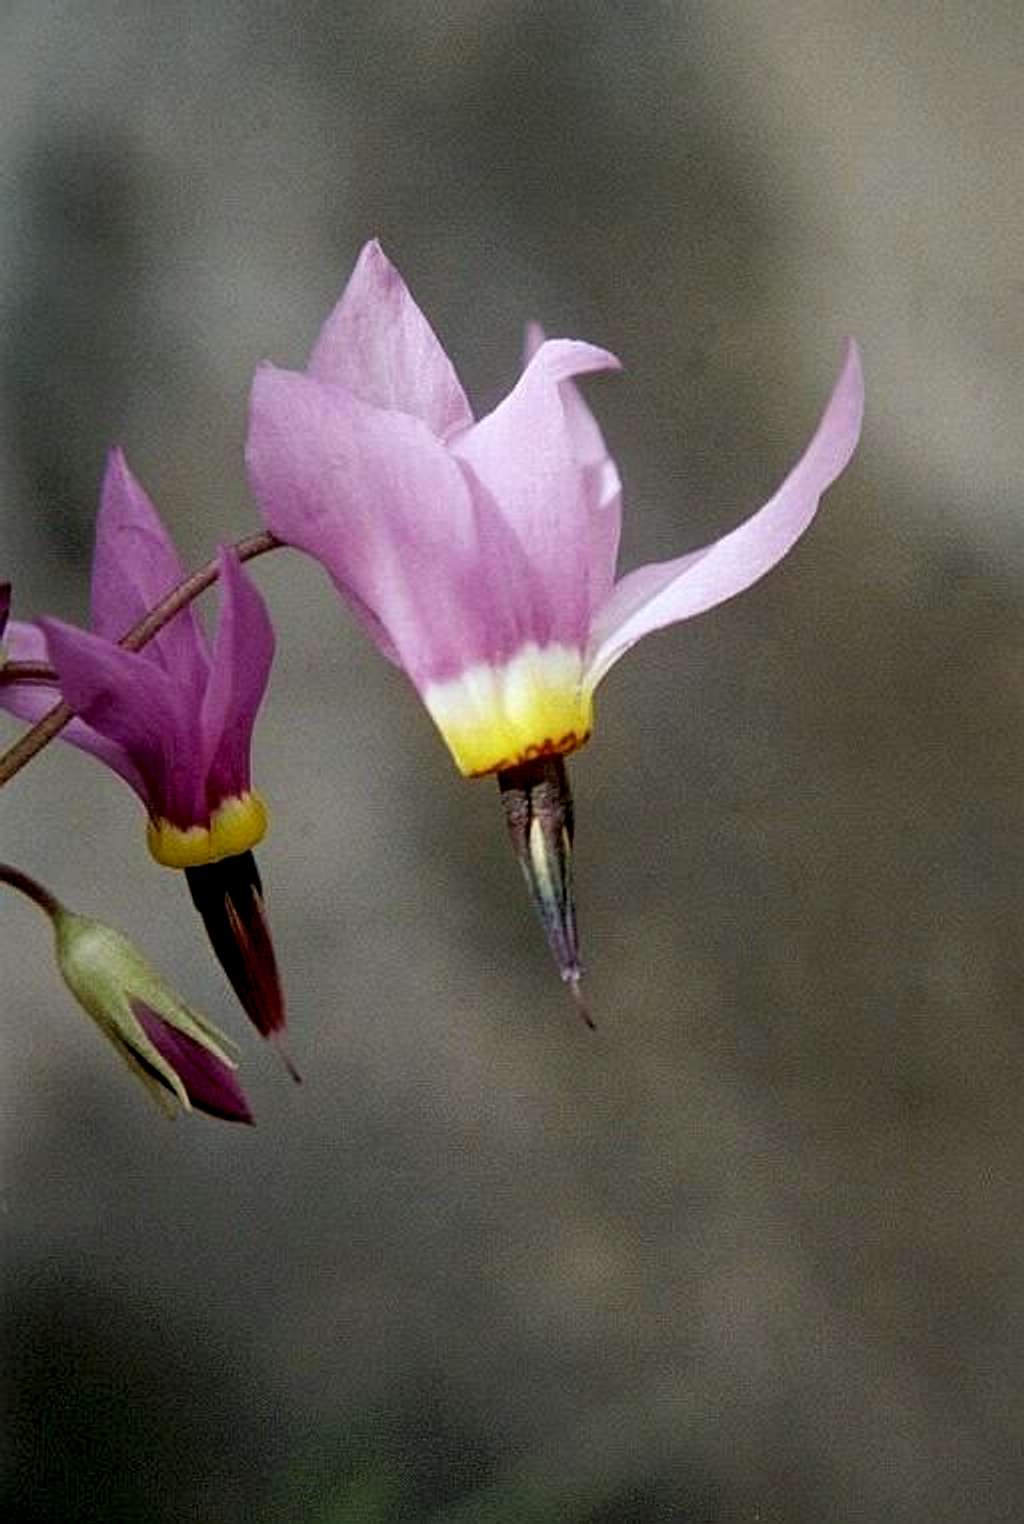 Narcissus Shooting-Star (Dodecatheon poeticum)